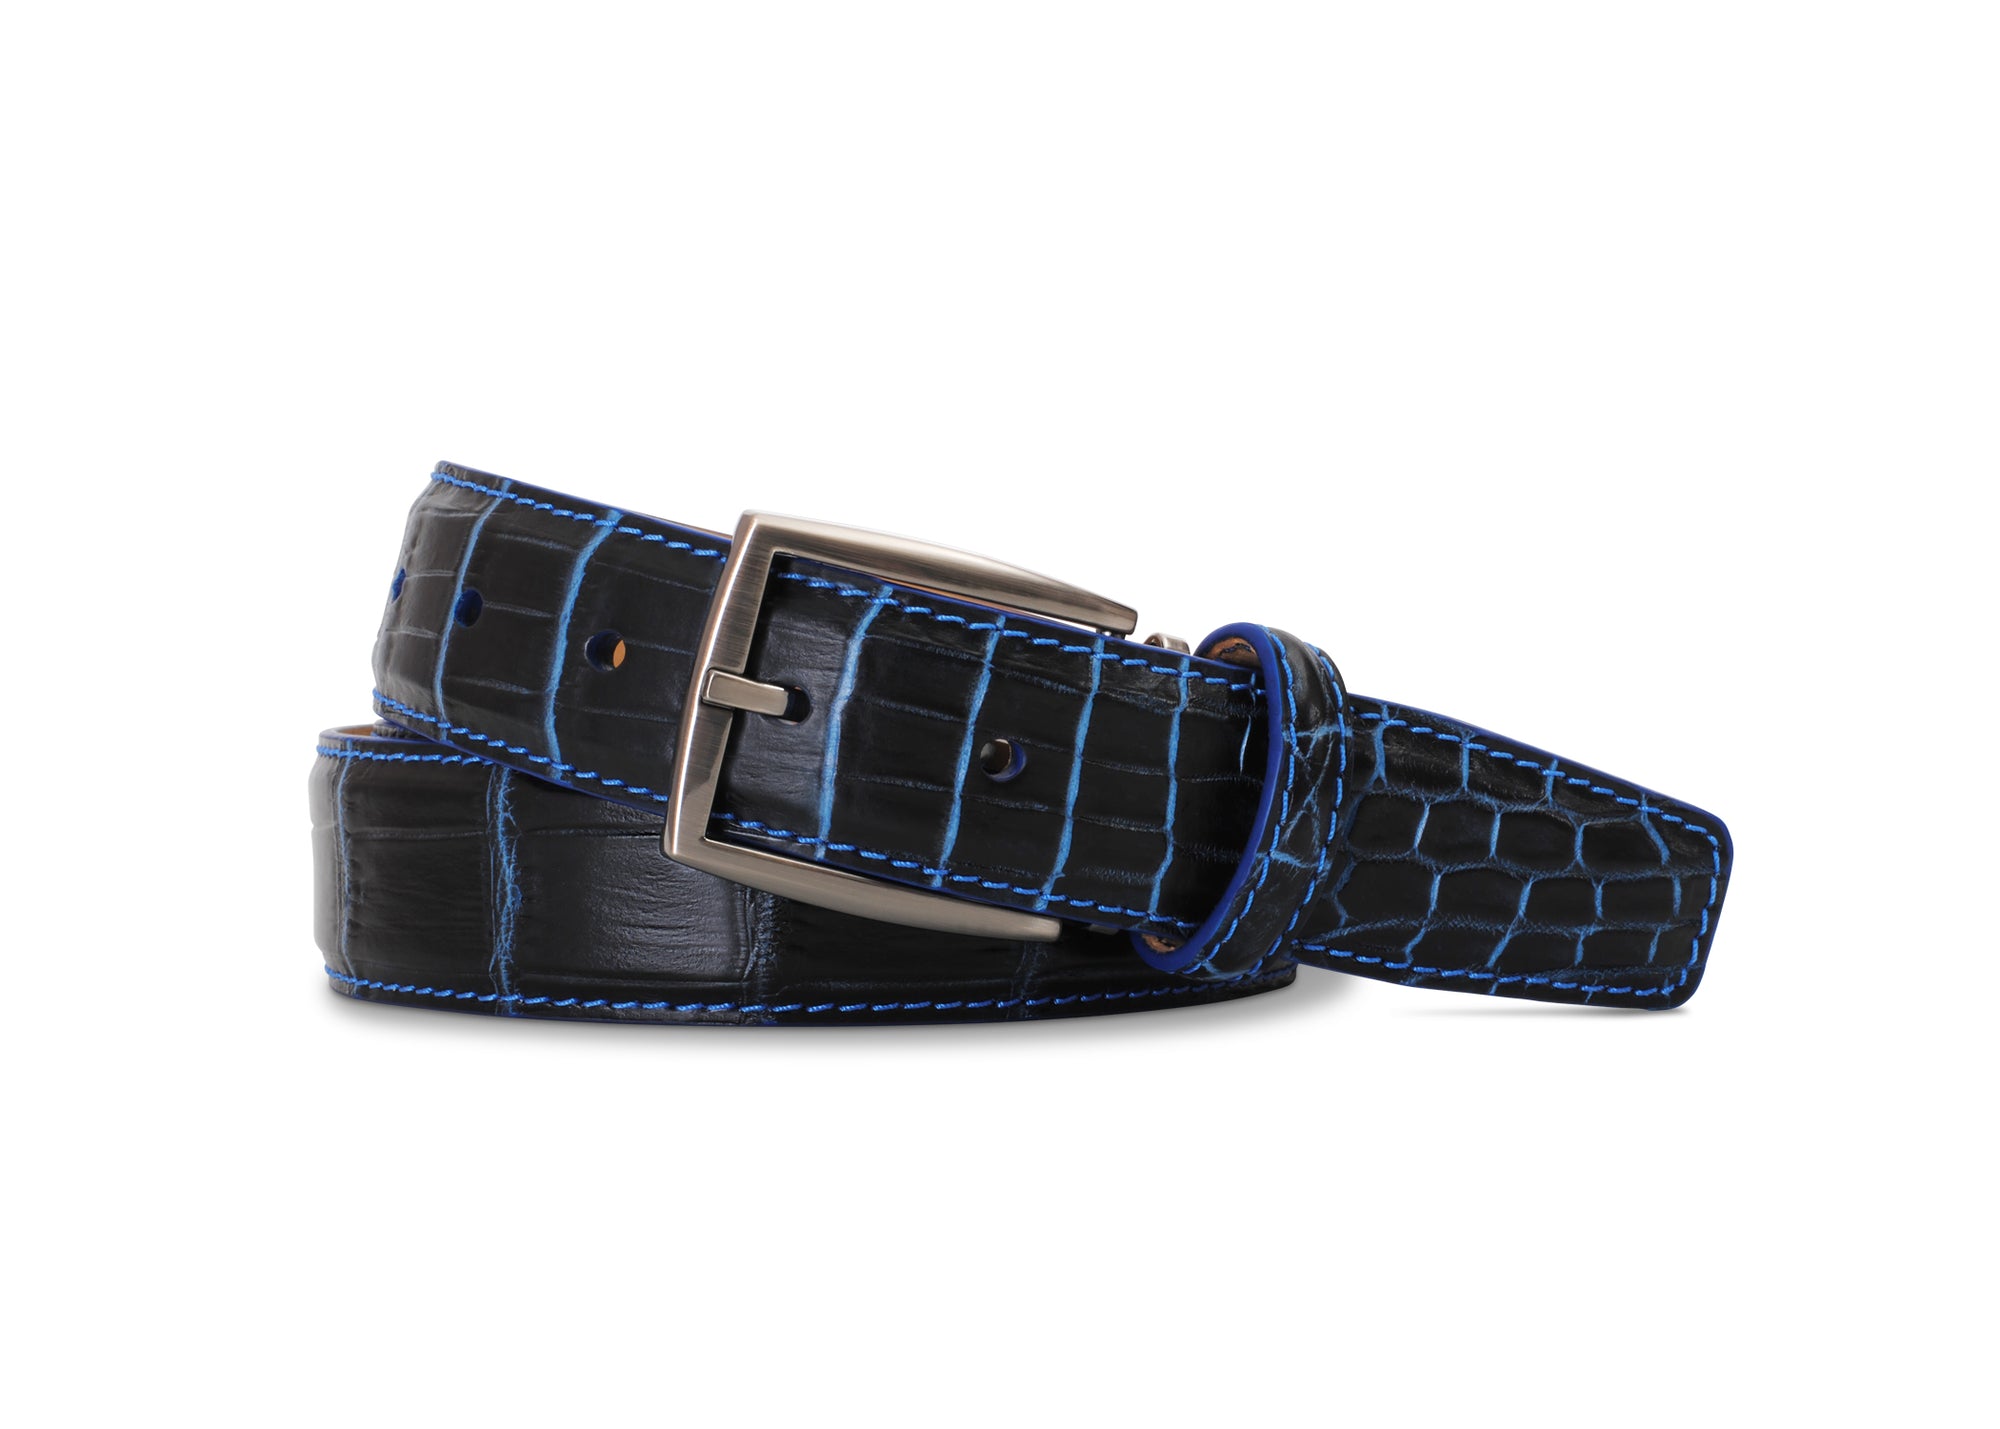 Two-Tone Nile Crocodile Belt in Navy on Royal Blue by Brookes & Hyde